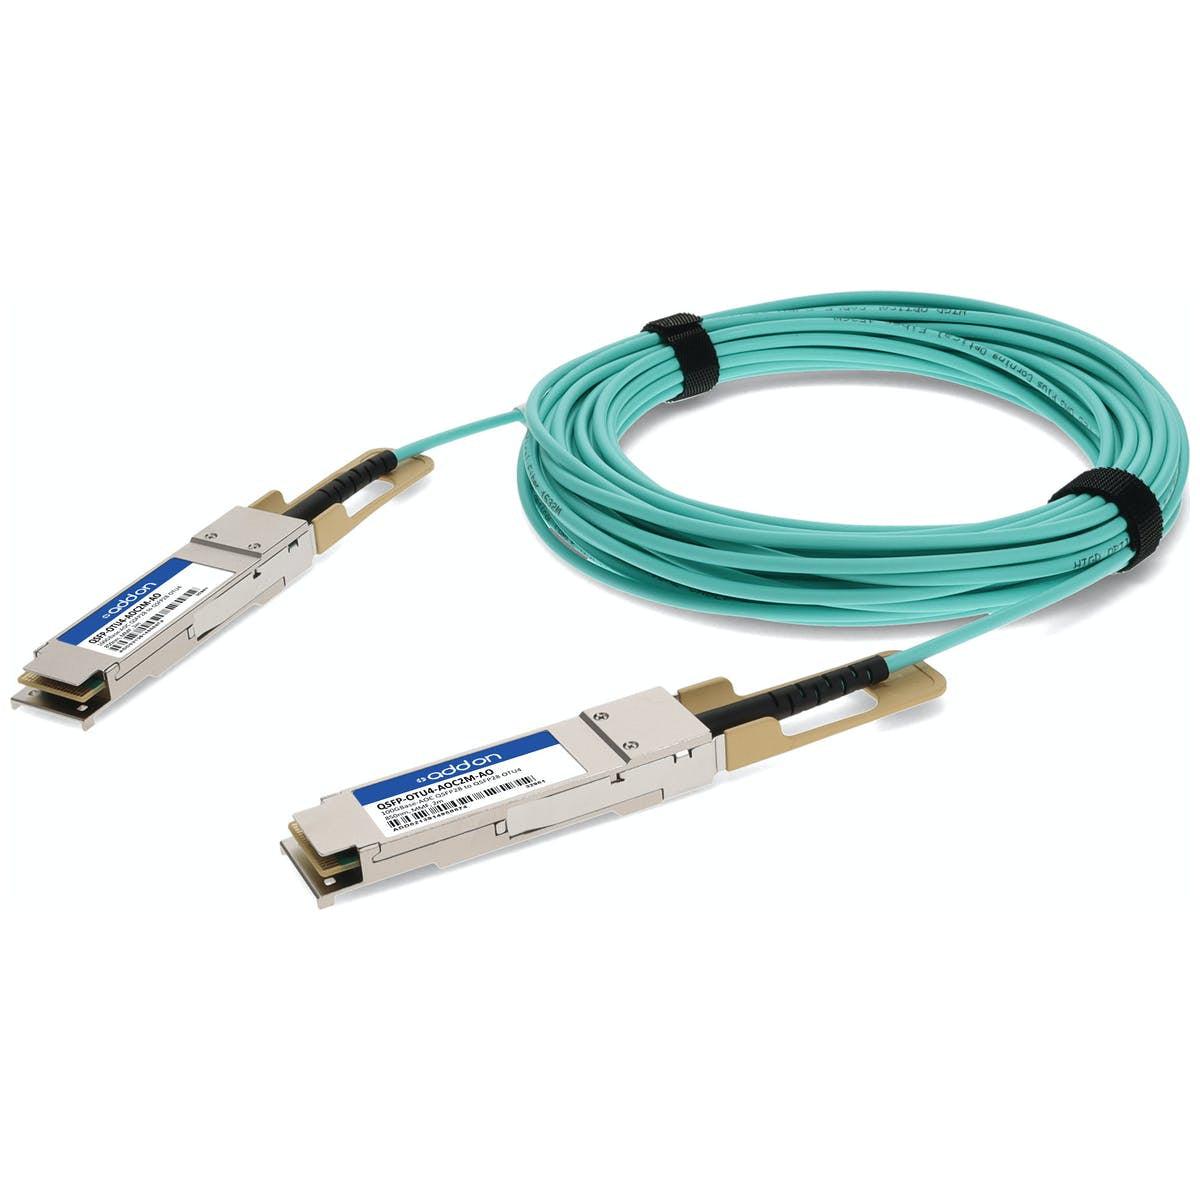 Addon Networks Qsfp-Otu4-Aoc2M-Ao Infiniband Cable 2 M Qsfp28 Turquoise